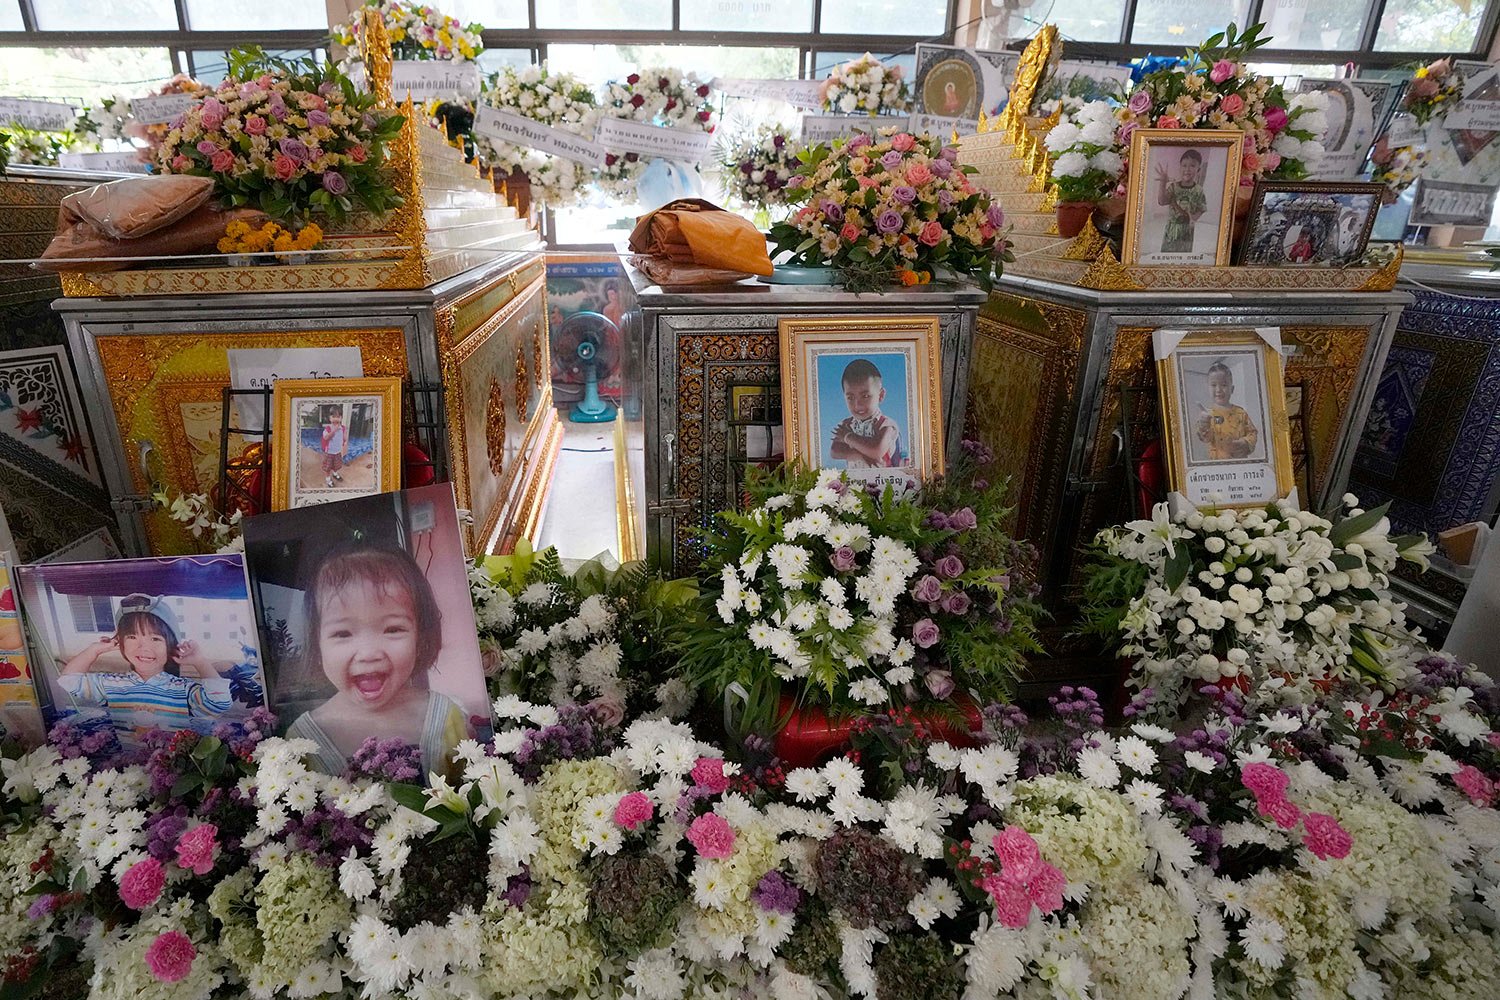  Photos of the victims of a mass killing attack are displayed around coffins inside the Wat Rat Samakee temple in the rural town of Uthai Sawan, north eastern Thailand, Sunday, Oct. 9, 2022. (AP Photo/Sakchai Lalit) 